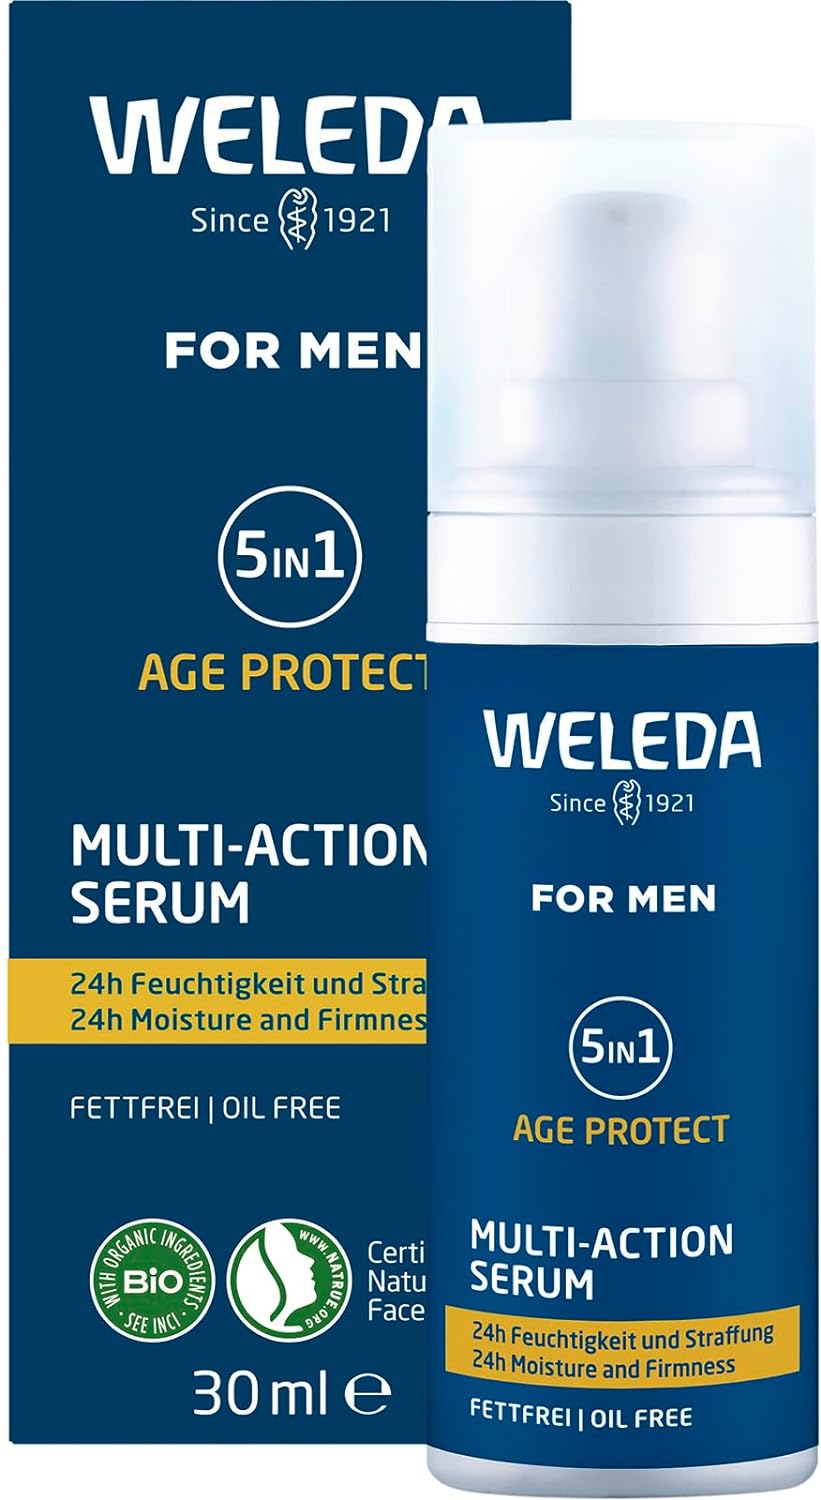 WELEDA BIO FOR MEN 5-in-1 Multi Action Serum-Natural Cosmetics Anti Aging Men \ 'S Face Care Concentrate Reduces Wrinkles & Tightens The Skin. Men \ 's face serum with aloe vera & pomegranate juice (1 x